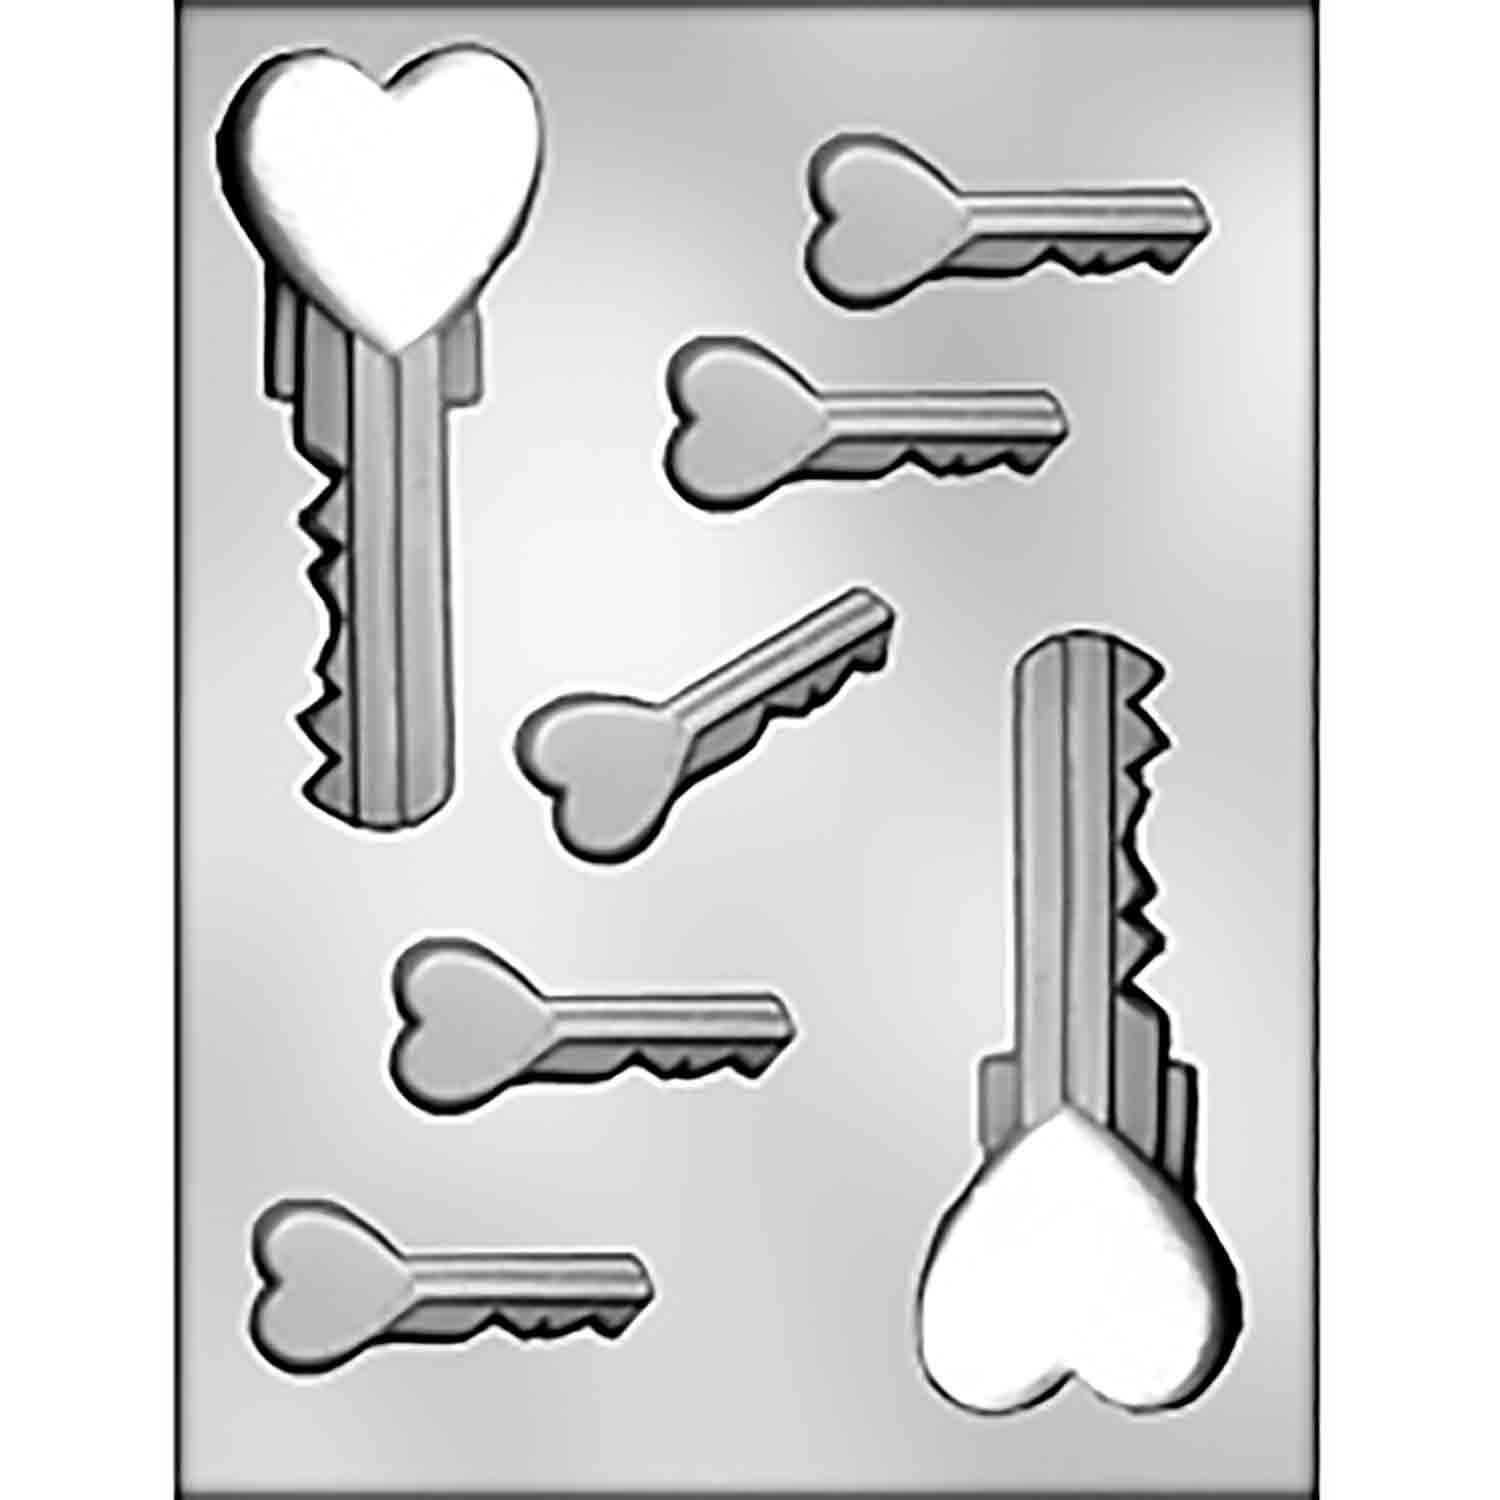 Large & Small Heart Keys Chocolate Candy Mold